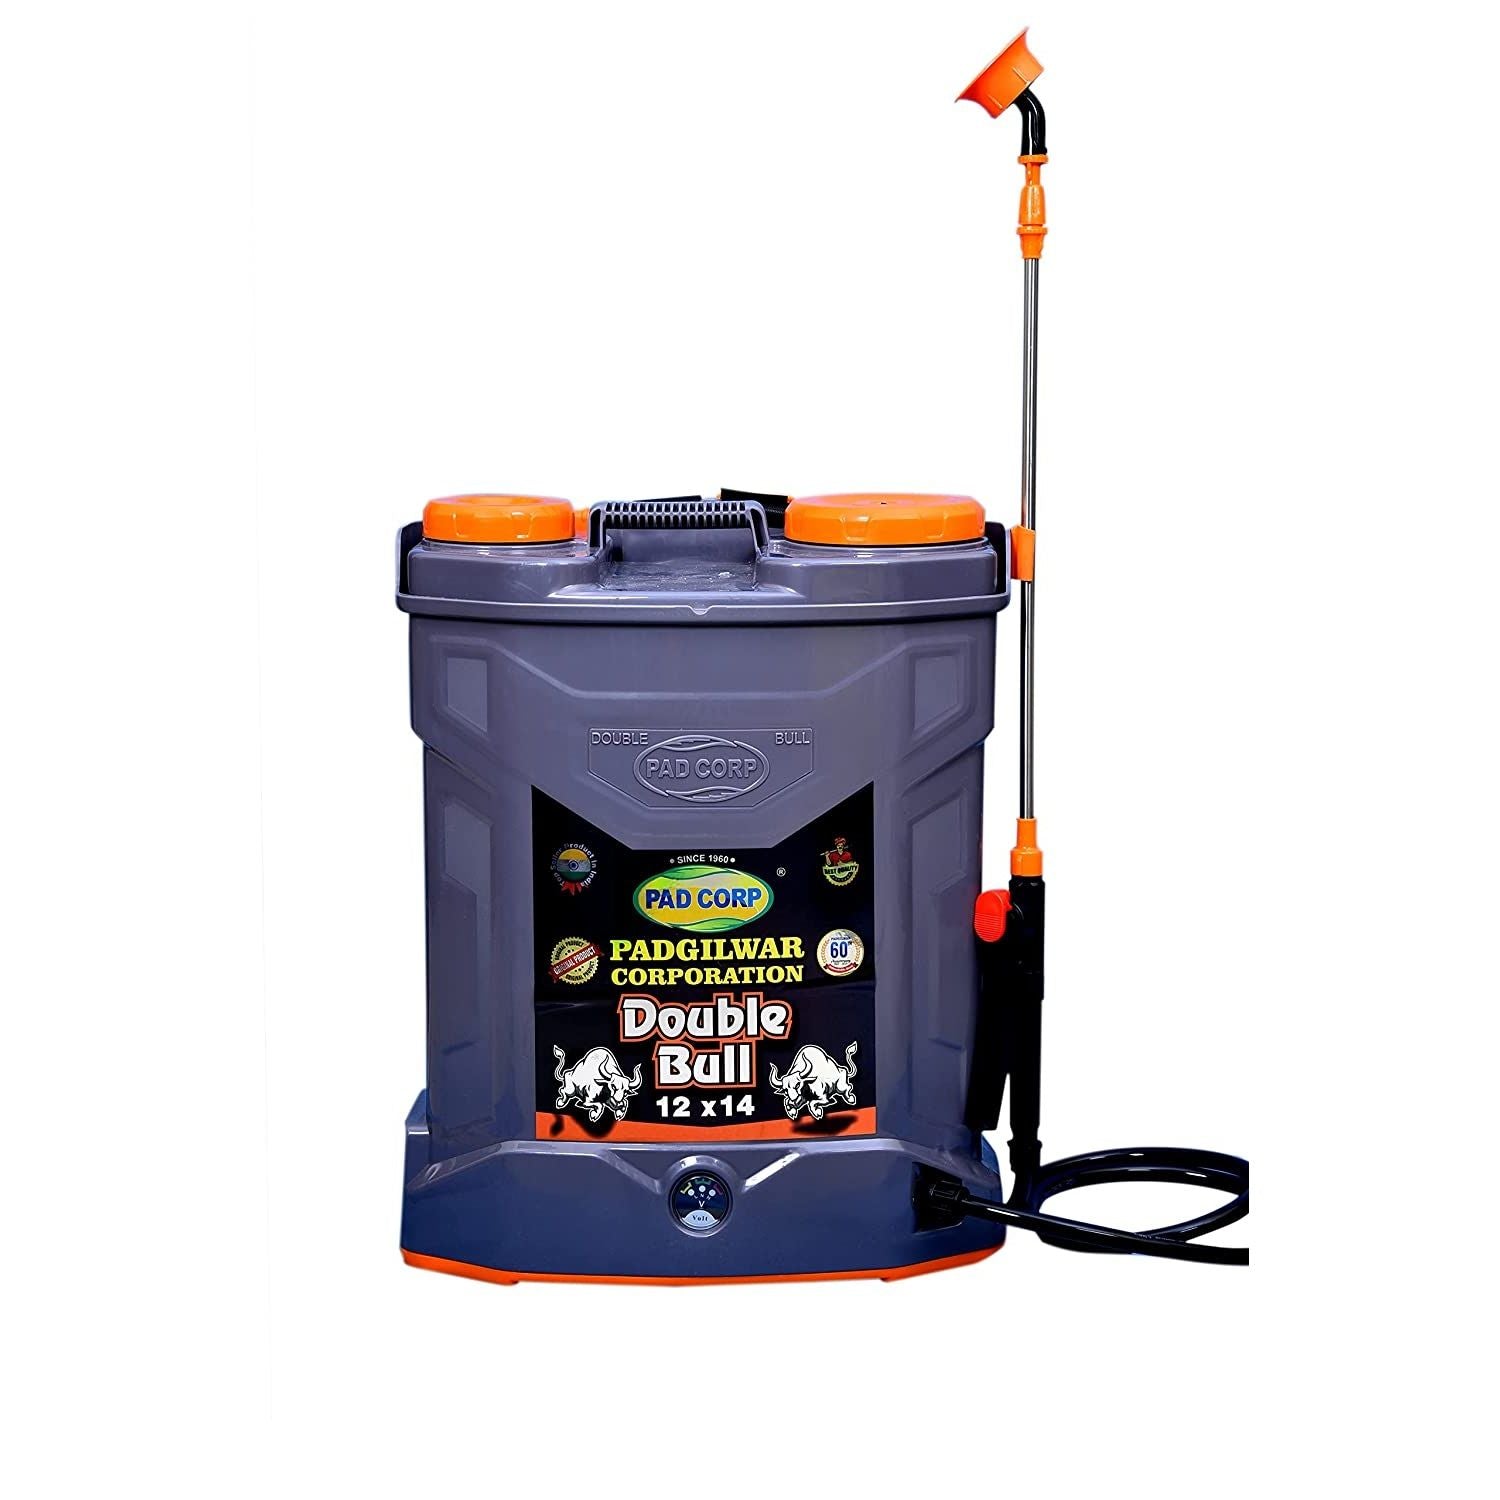 Pad Corp High Pressure Double Motor Bull Battery Operated Sprayer 18L